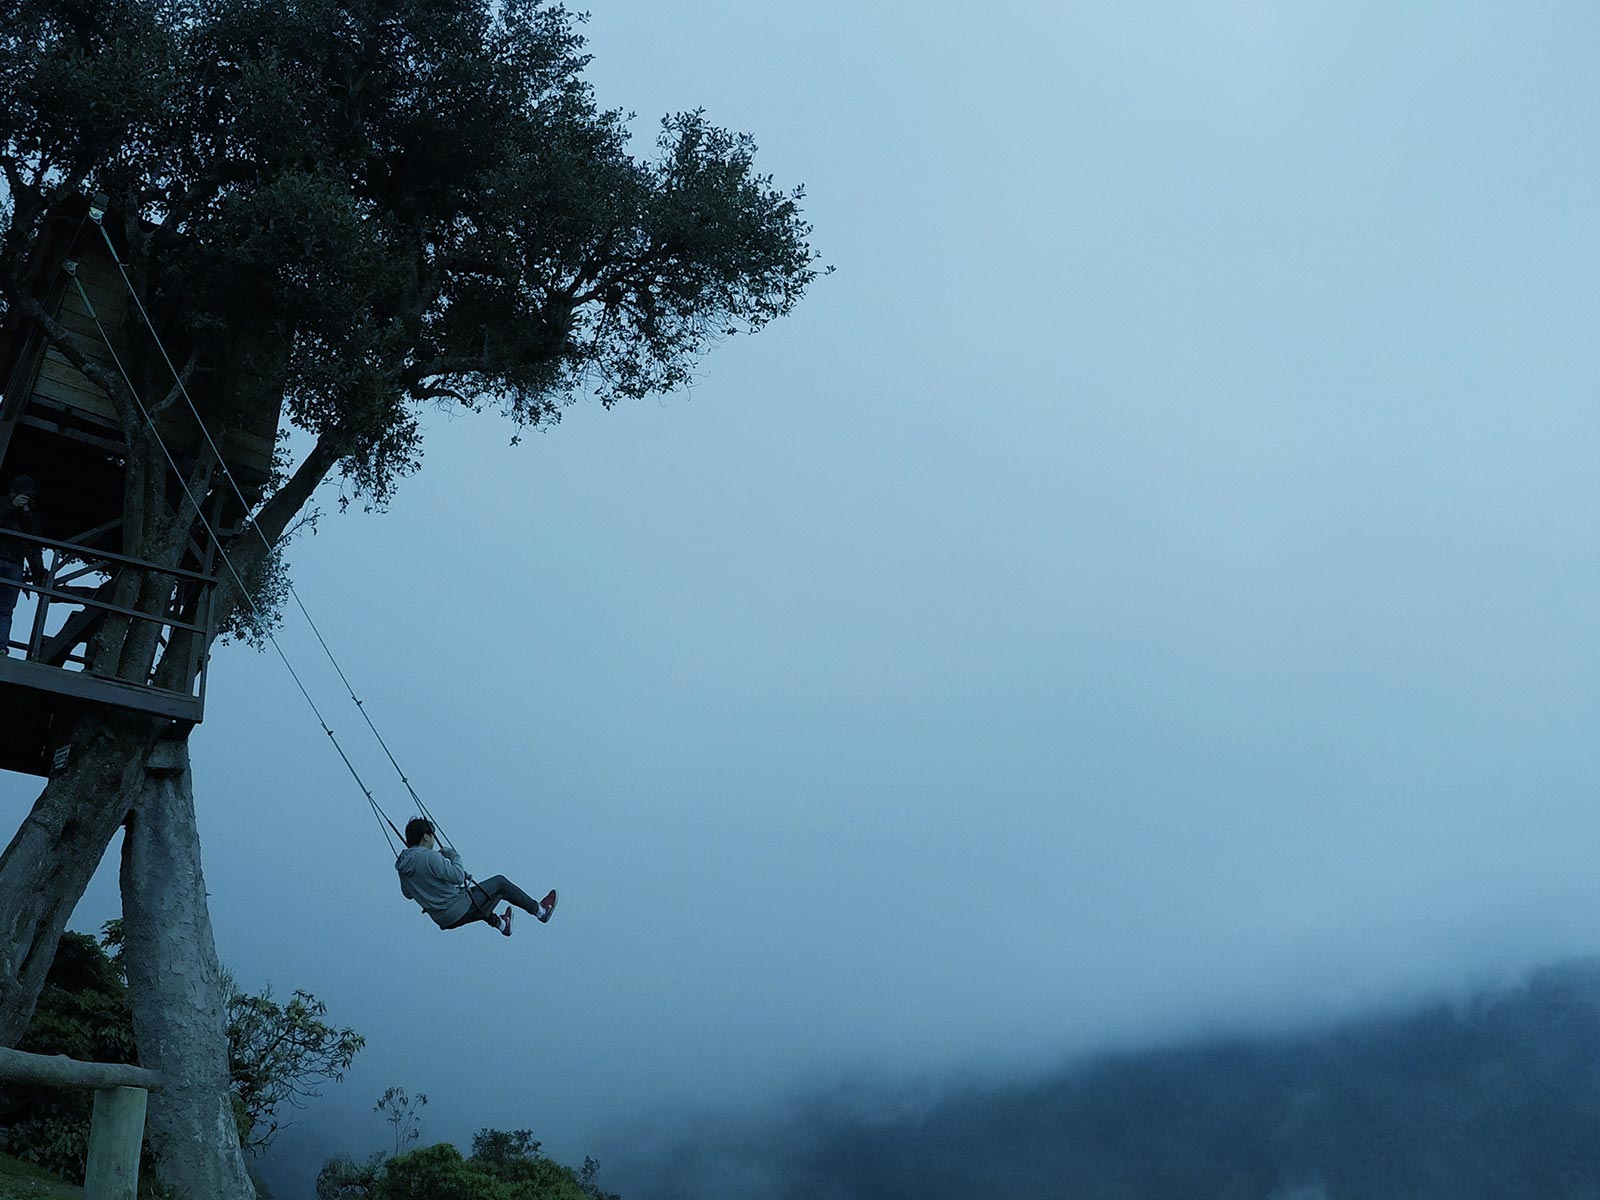 The swing at the end of the world during a cloudy day in Banôs, Ecuador. A Swing, The Equator & needing the Banôs in Banôs